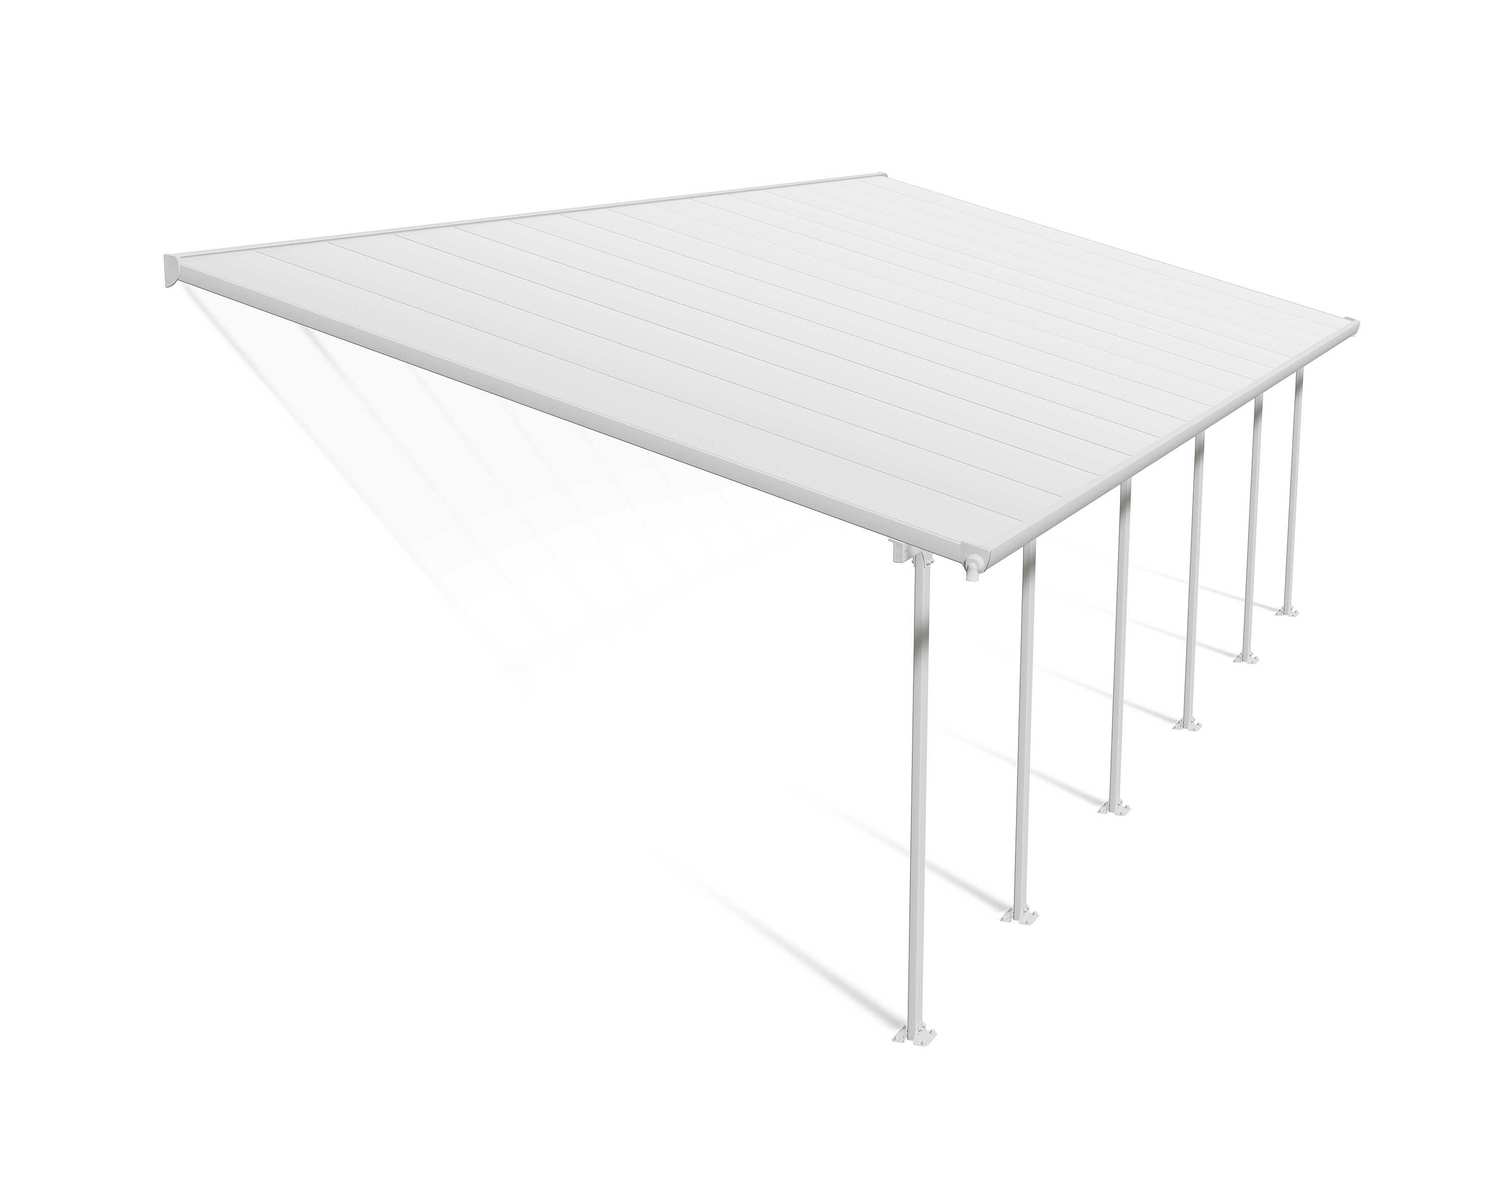 Patio Cover Kit Feria 4 ft. x 10.31 ft. White Structure &amp; White Multi Wall Glazing